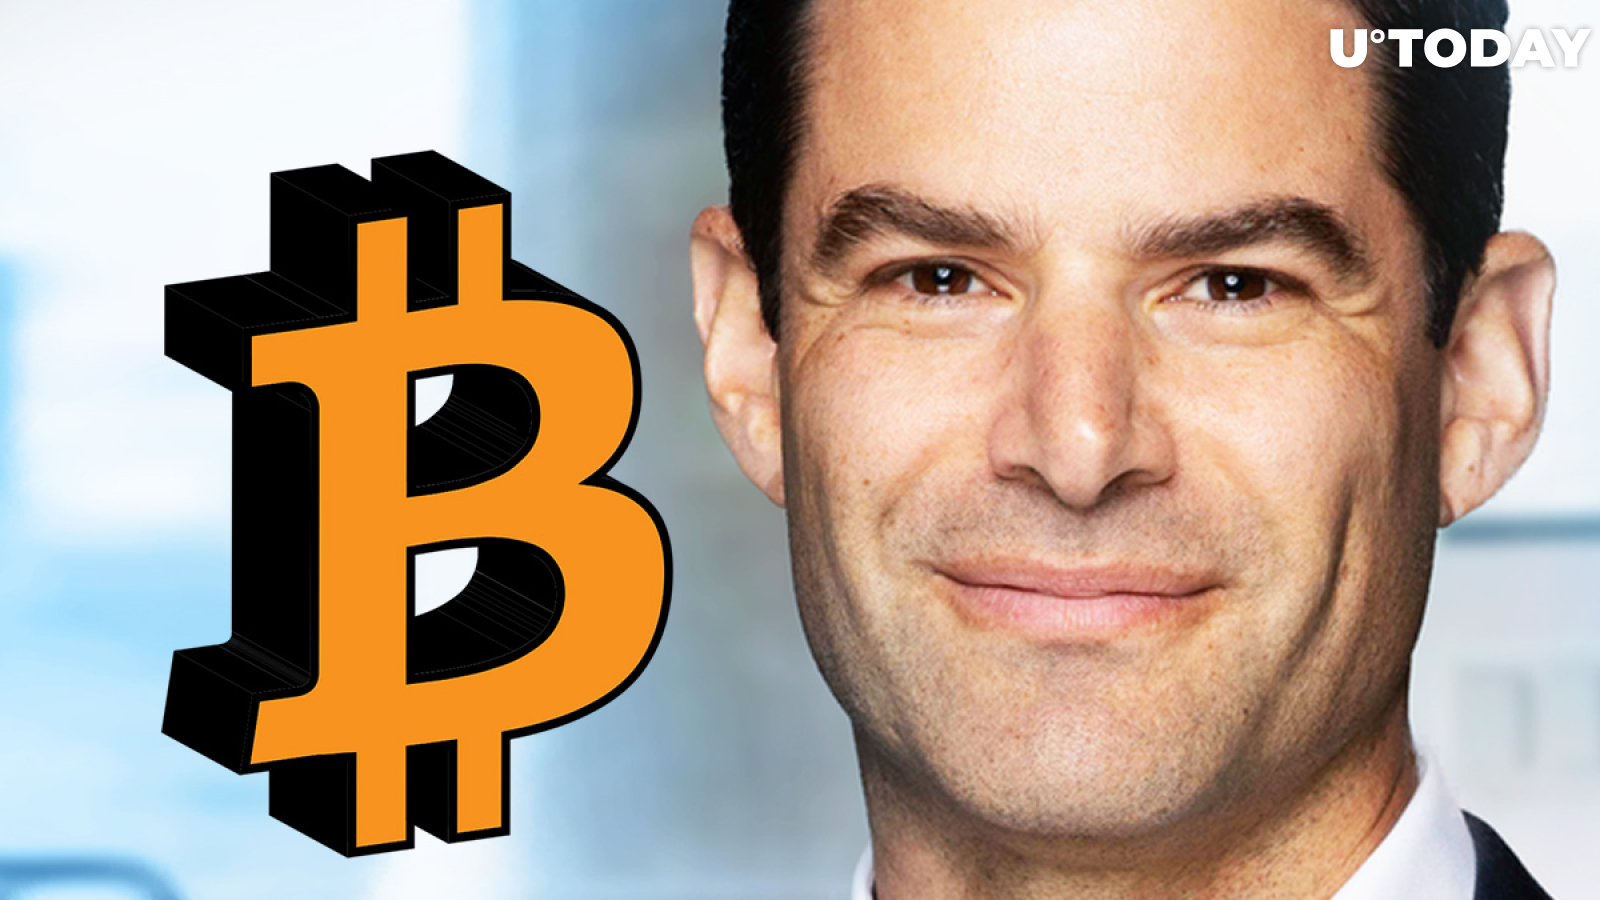 Twitter Considering Adding Bitcoin to Its Balance Sheet, According to CFO Ned Segal